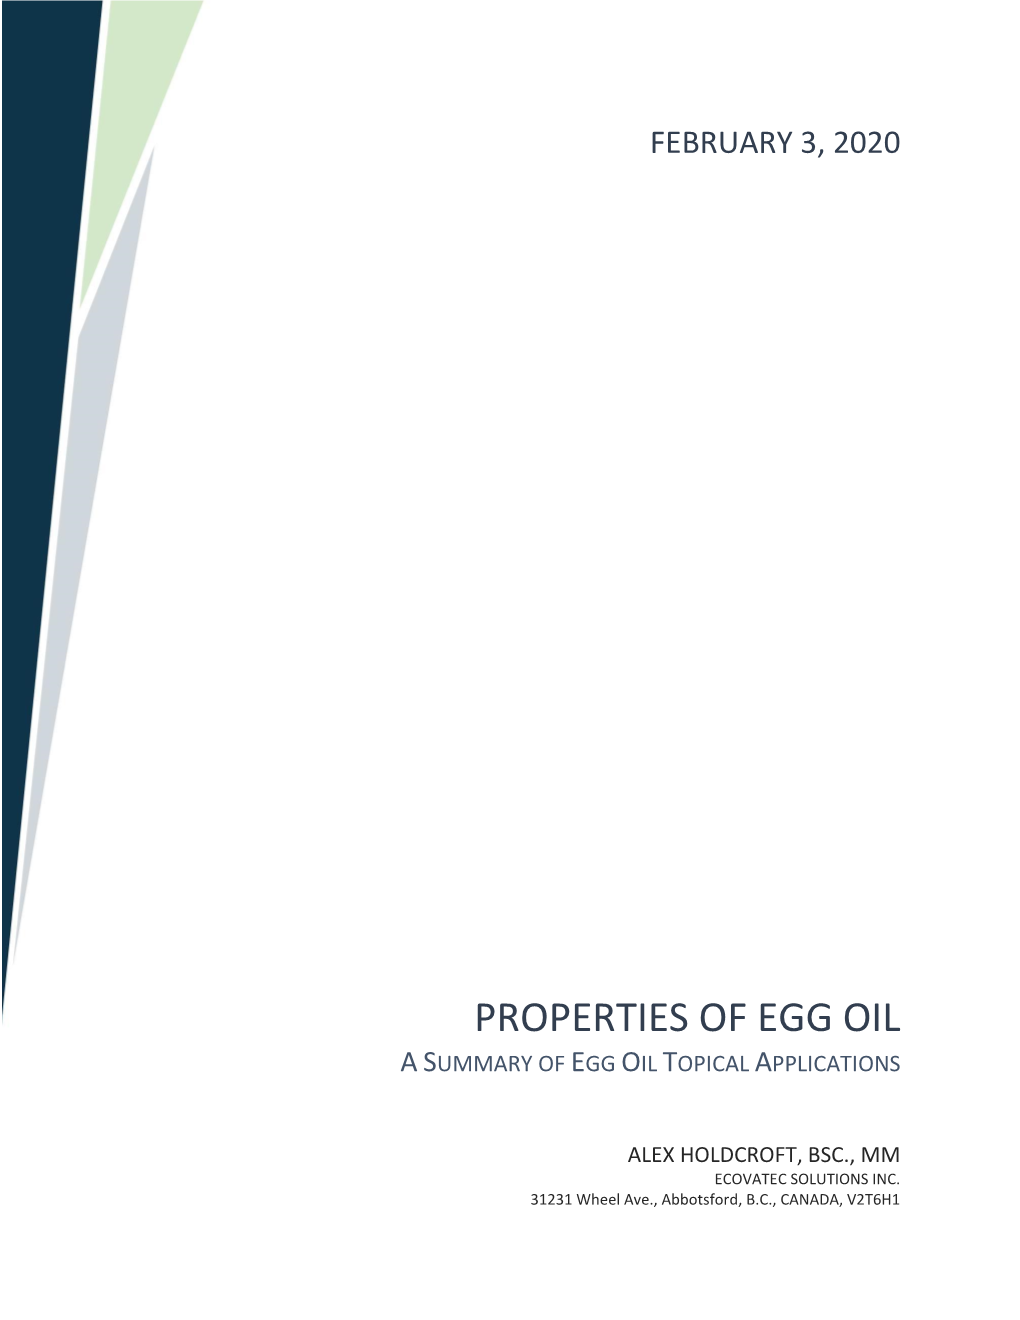 Properties of Egg Oil a Summary of Egg Oil Topical Applications